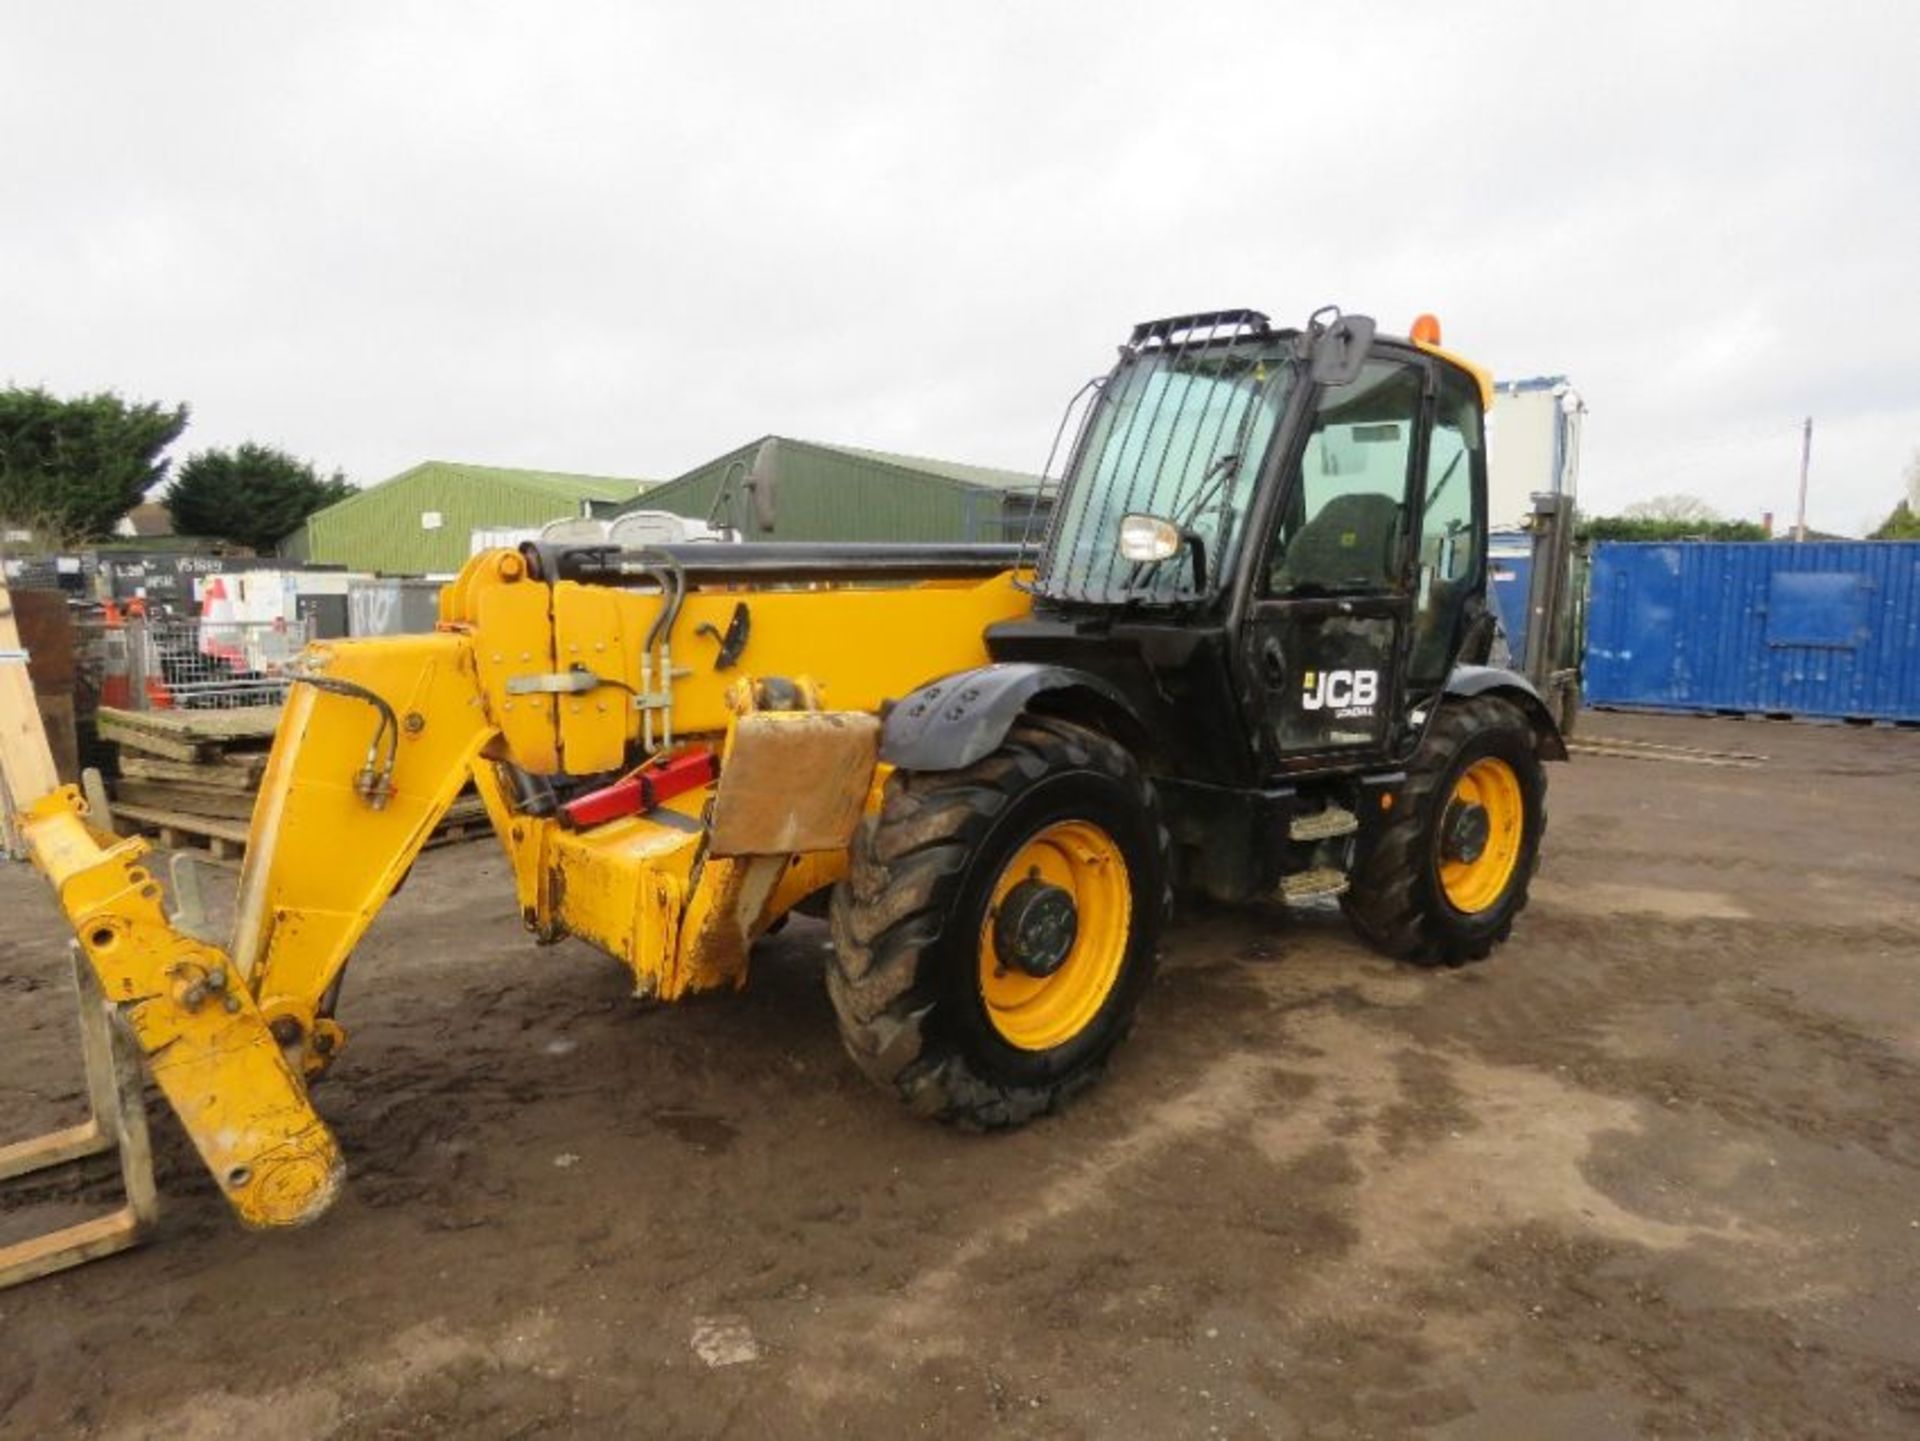 JCB 540-140 TELEHANDLER REG:RV17 YGT WITH V5. 14METRE REACH, 4 TONNE LIFT OWNED FROM NEW BY THE COMP - Image 20 of 23